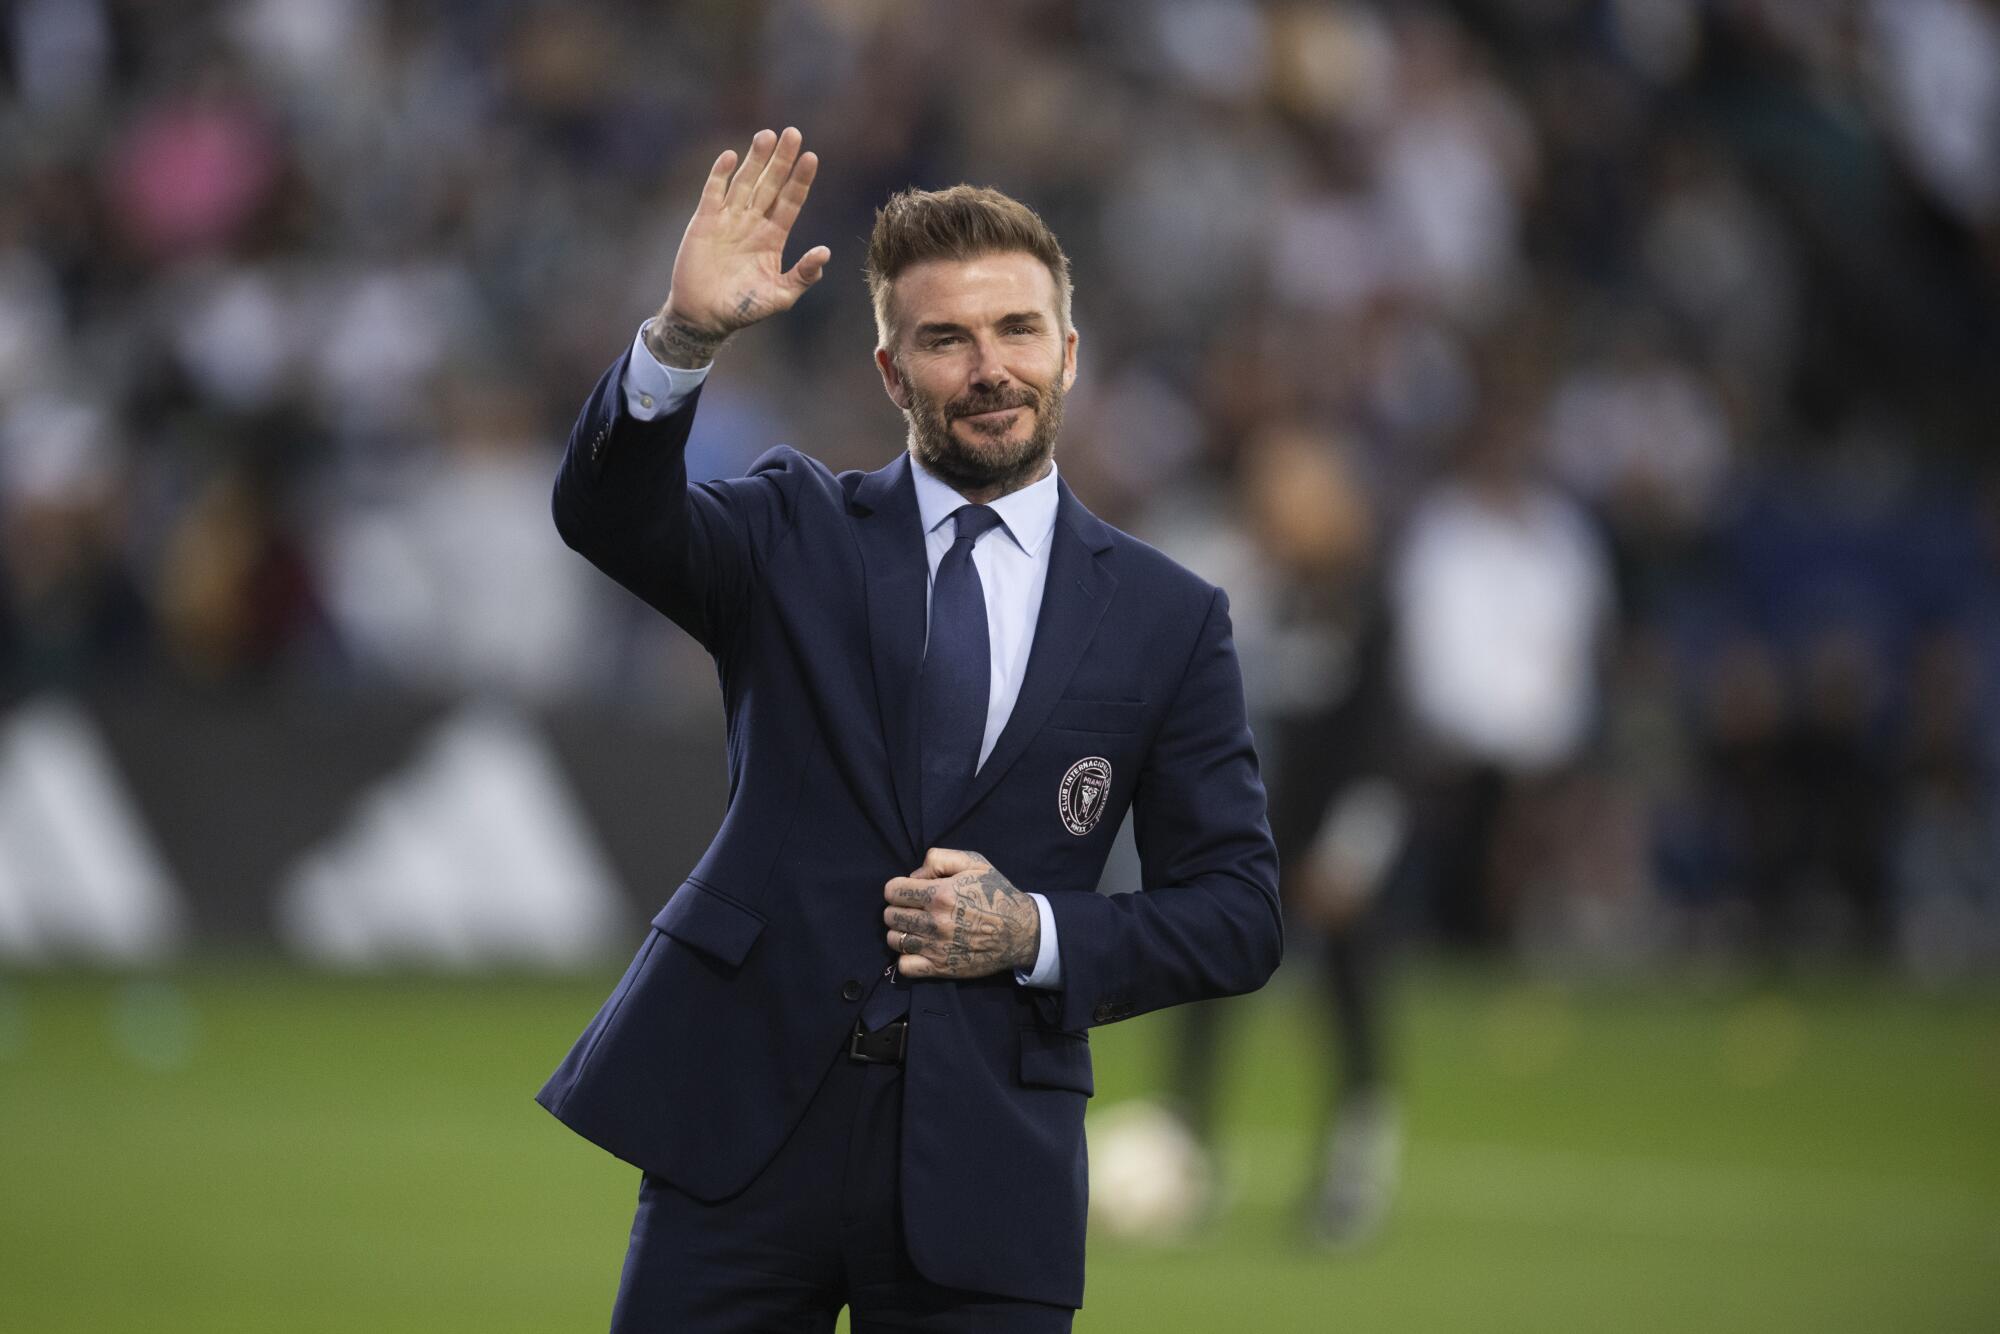 David Beckham wears a suit and waves to the stands.